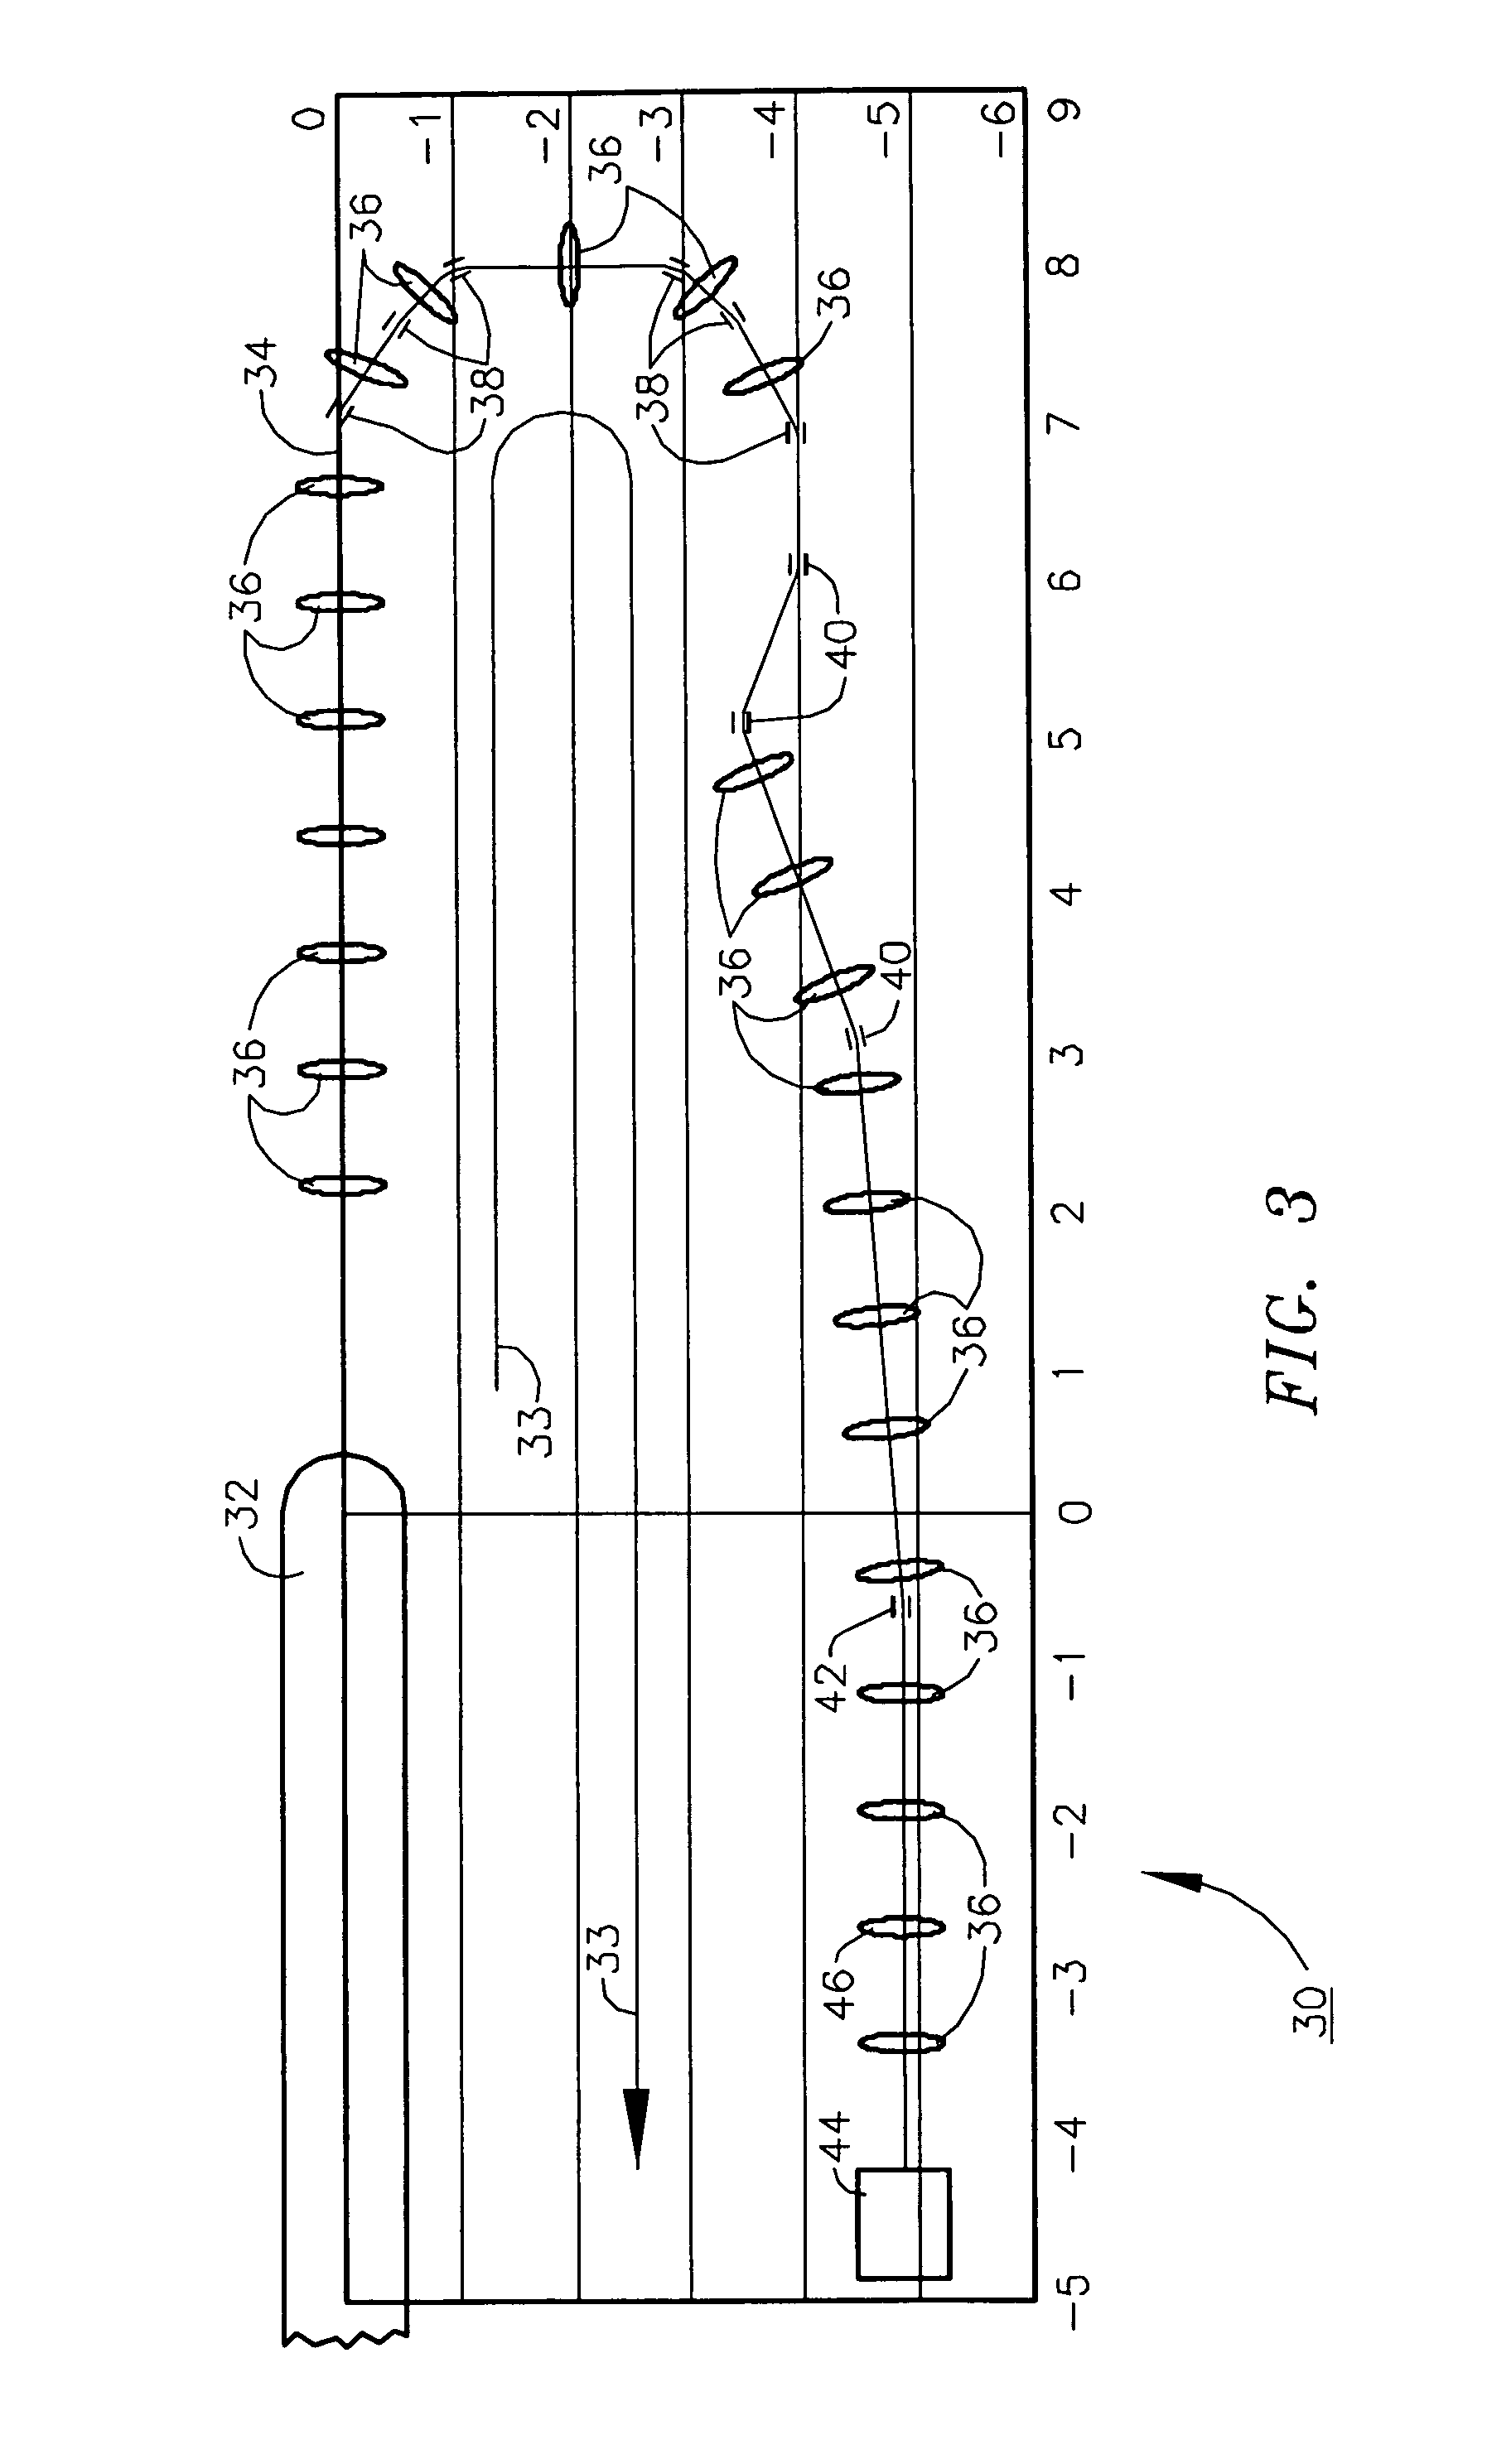 Method of controlling coherent synchroton radiation-driven degradation of beam quality during bunch length compression